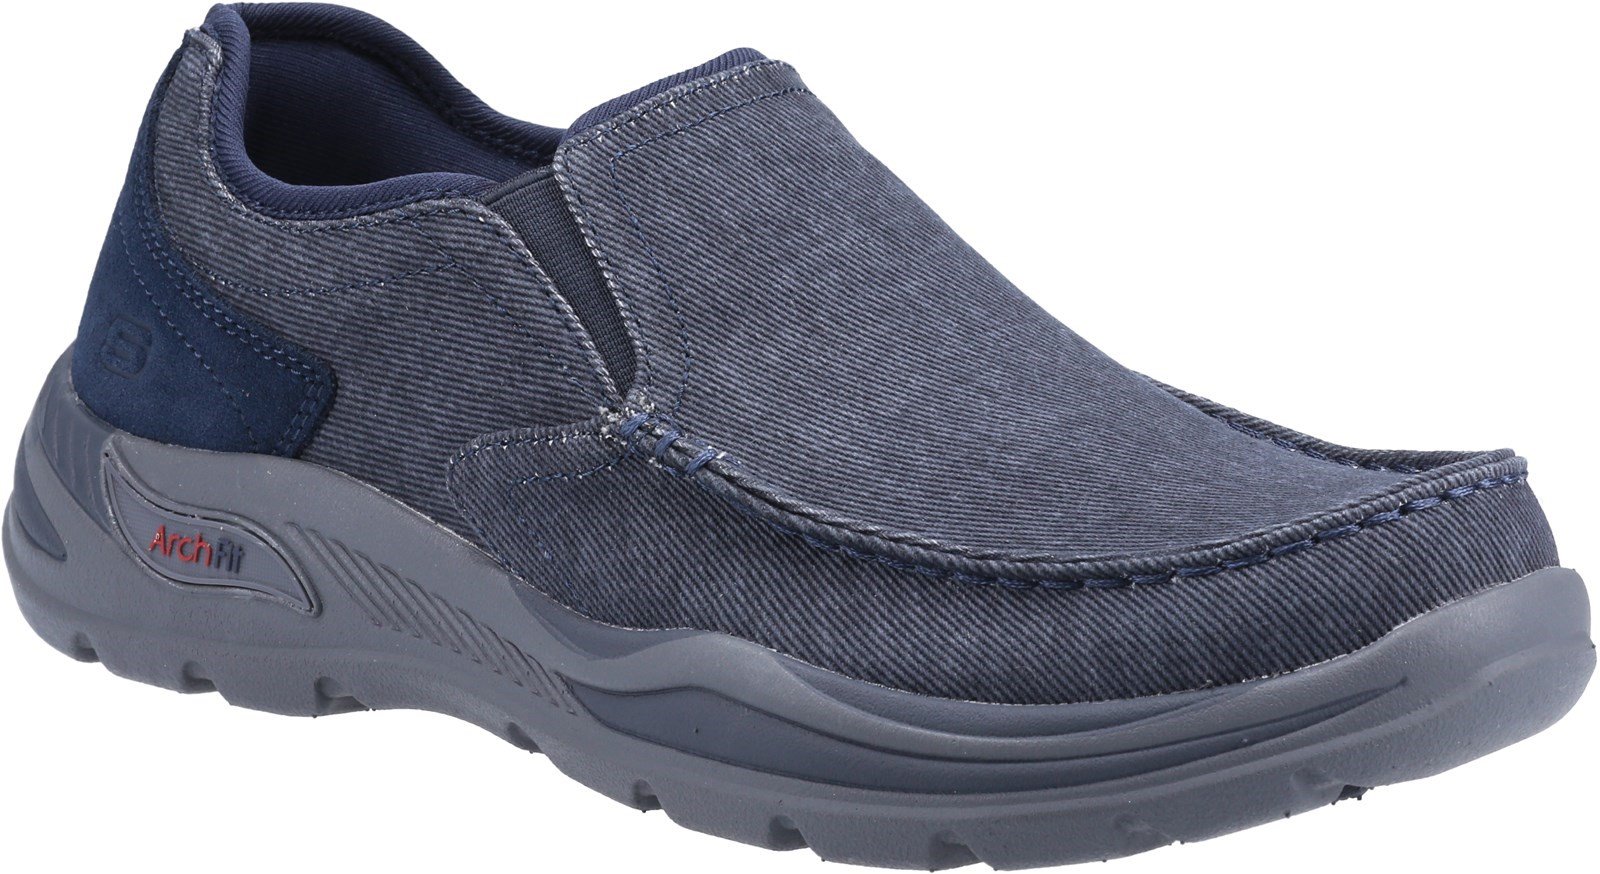 Skechers Men's Arch Fit Motley Rolens Casual Trainer Various Colours 32190 - Navy 6